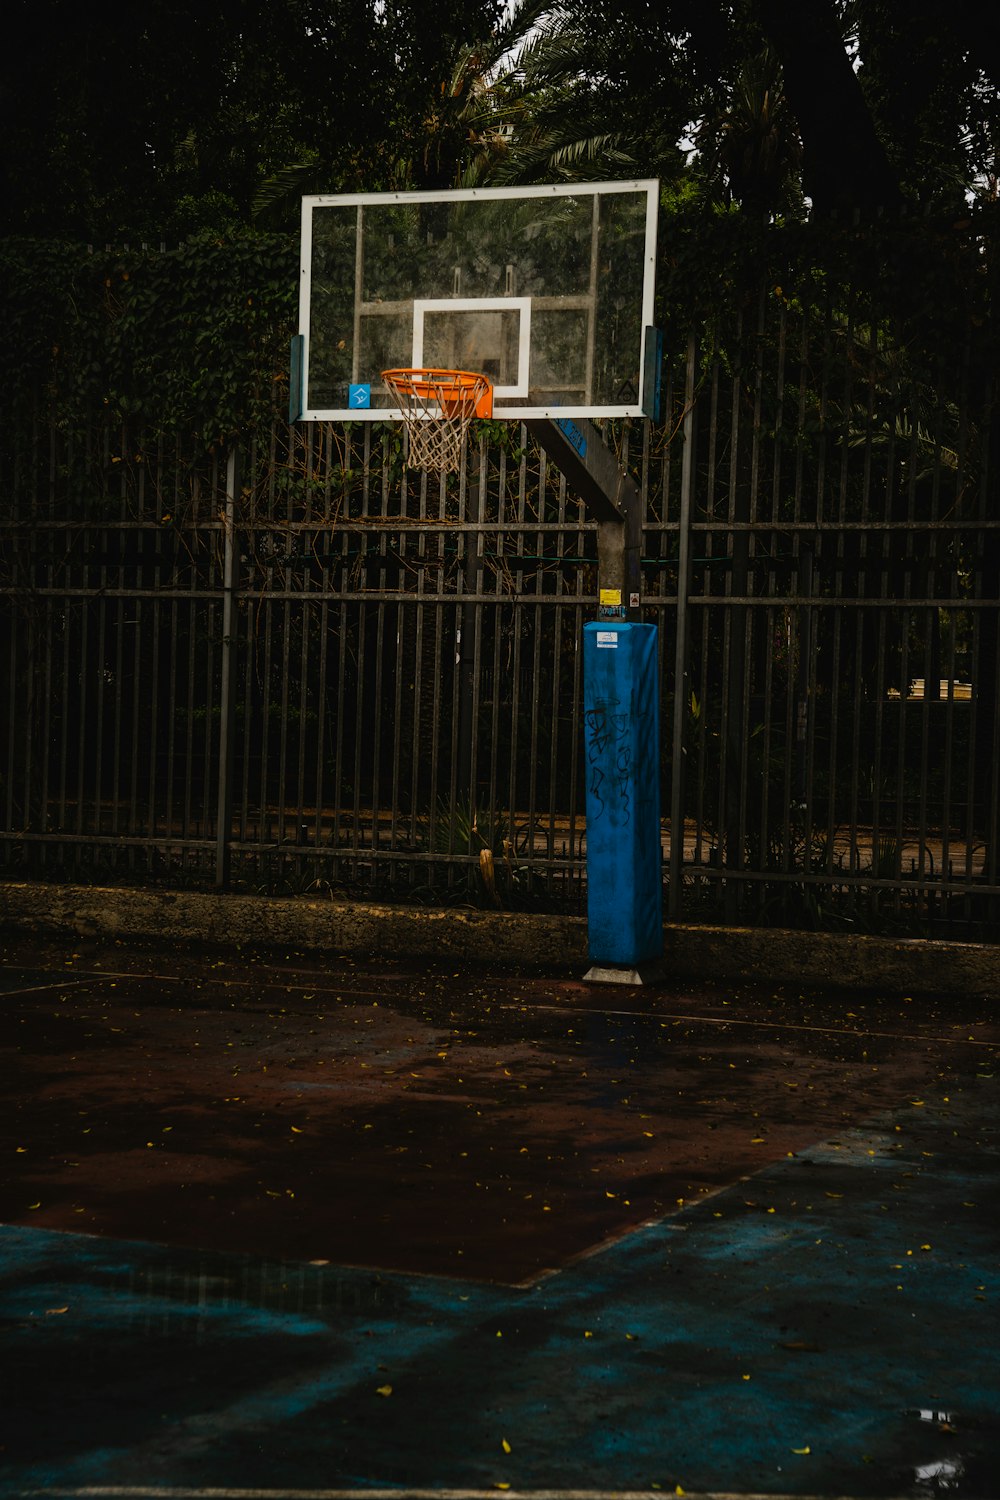 a basketball hoop in front of a fence